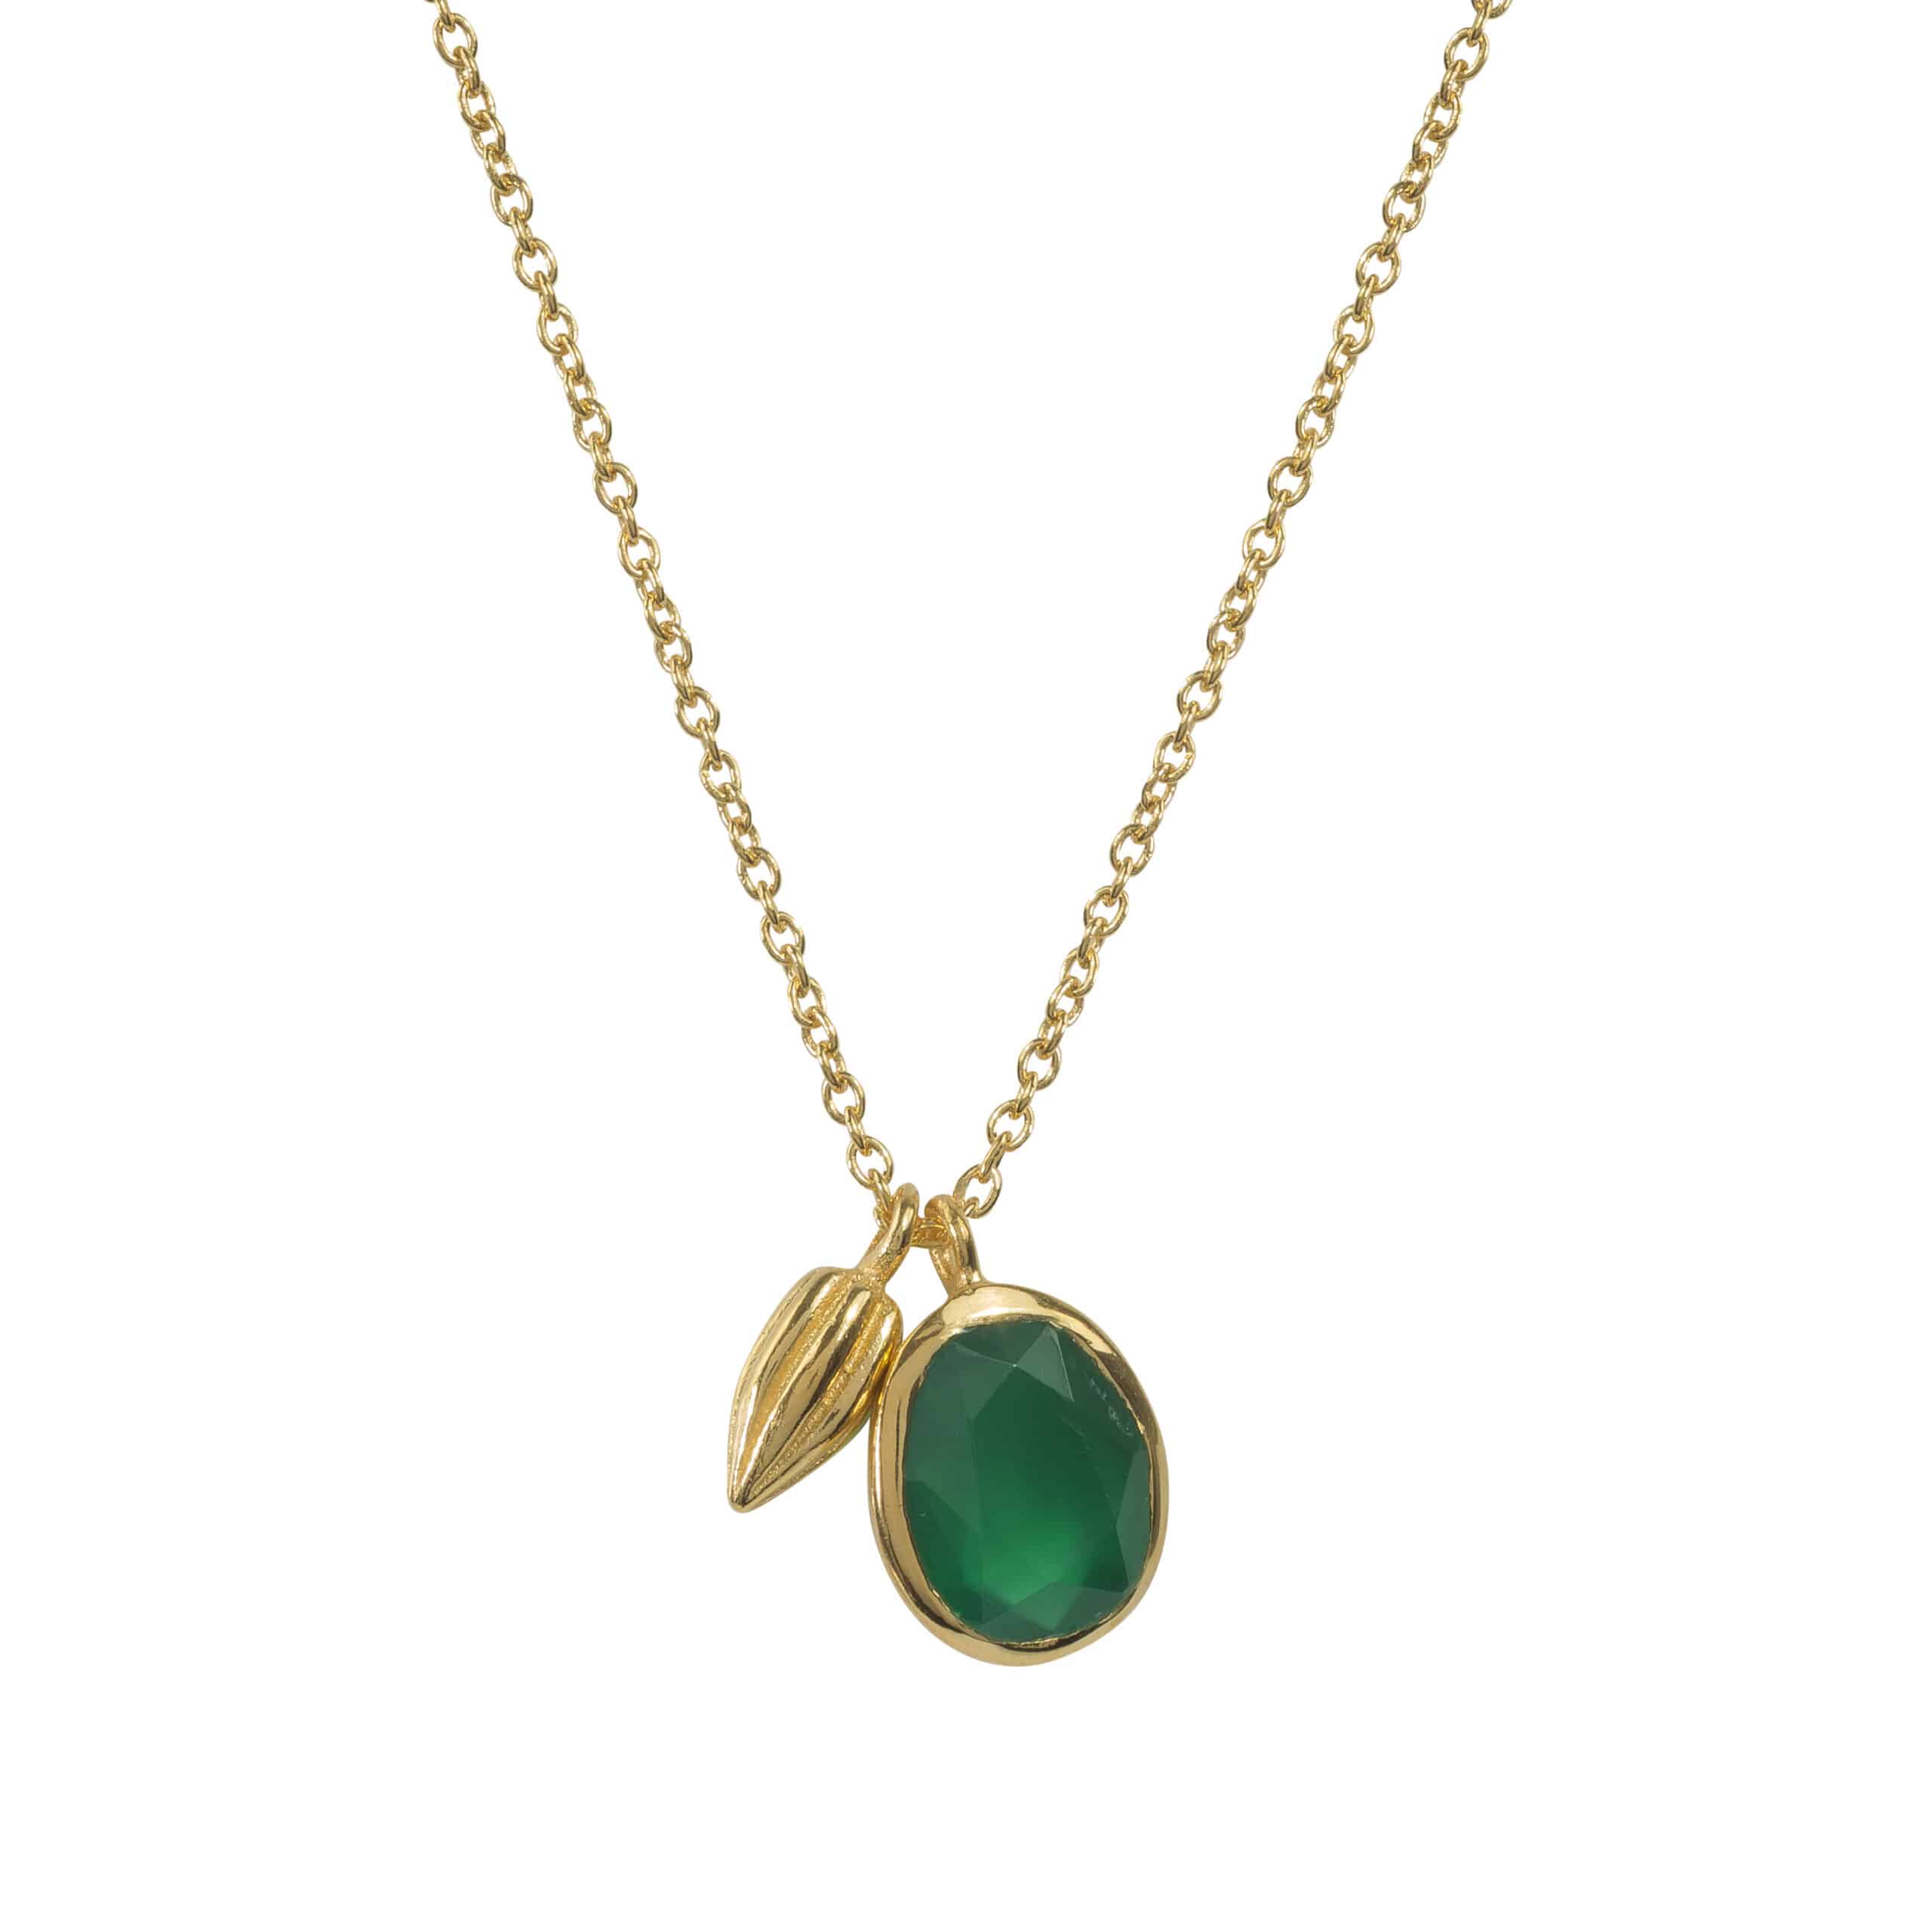 Gold Tulum Pendant with Cocoa Pod Charm and Green Onyx €95 JUVN4gGO